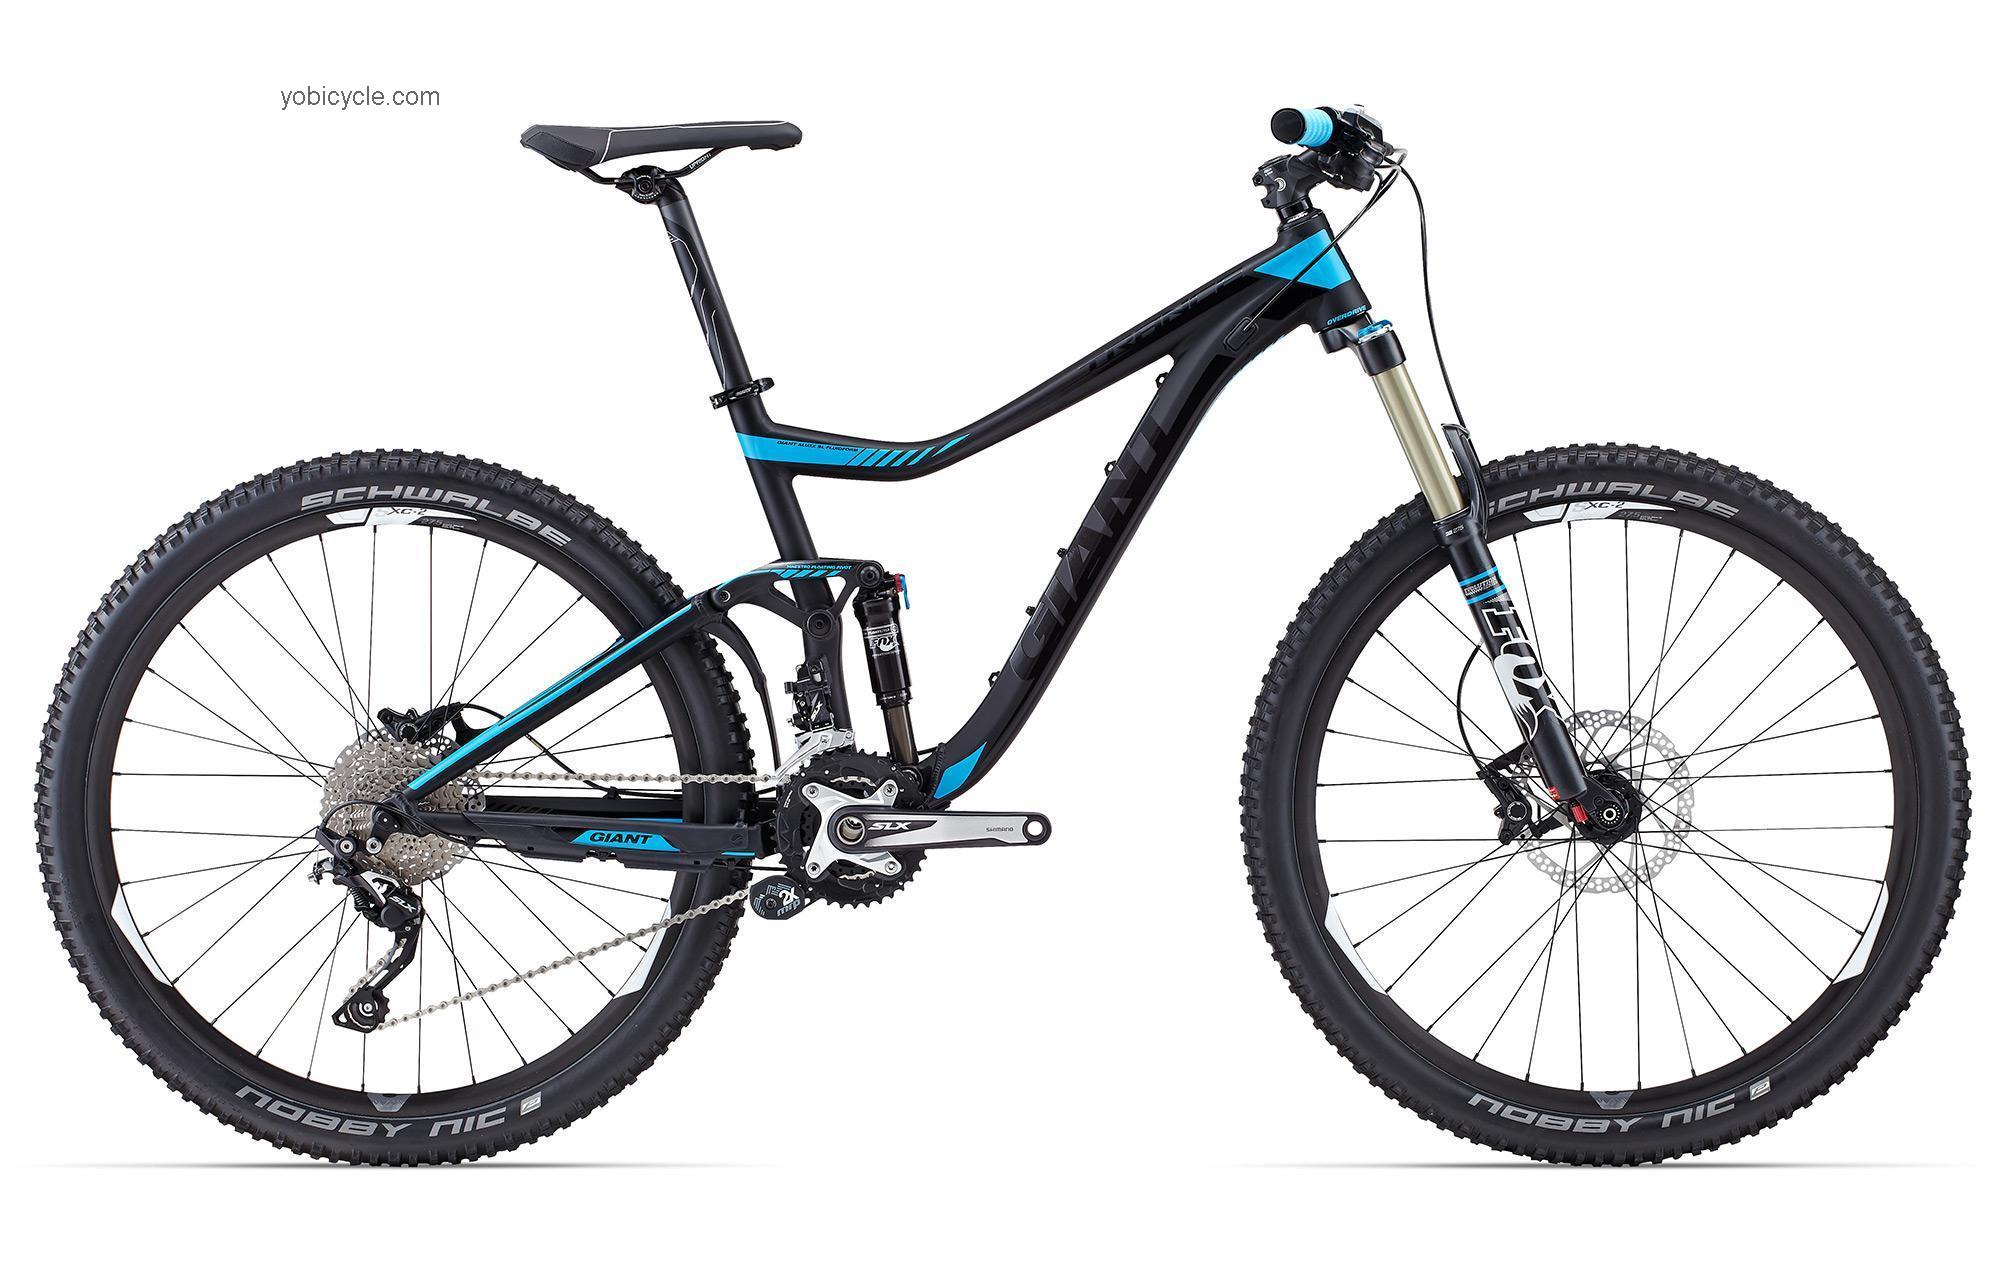 Giant Trance 27.5 2 2015 comparison online with competitors